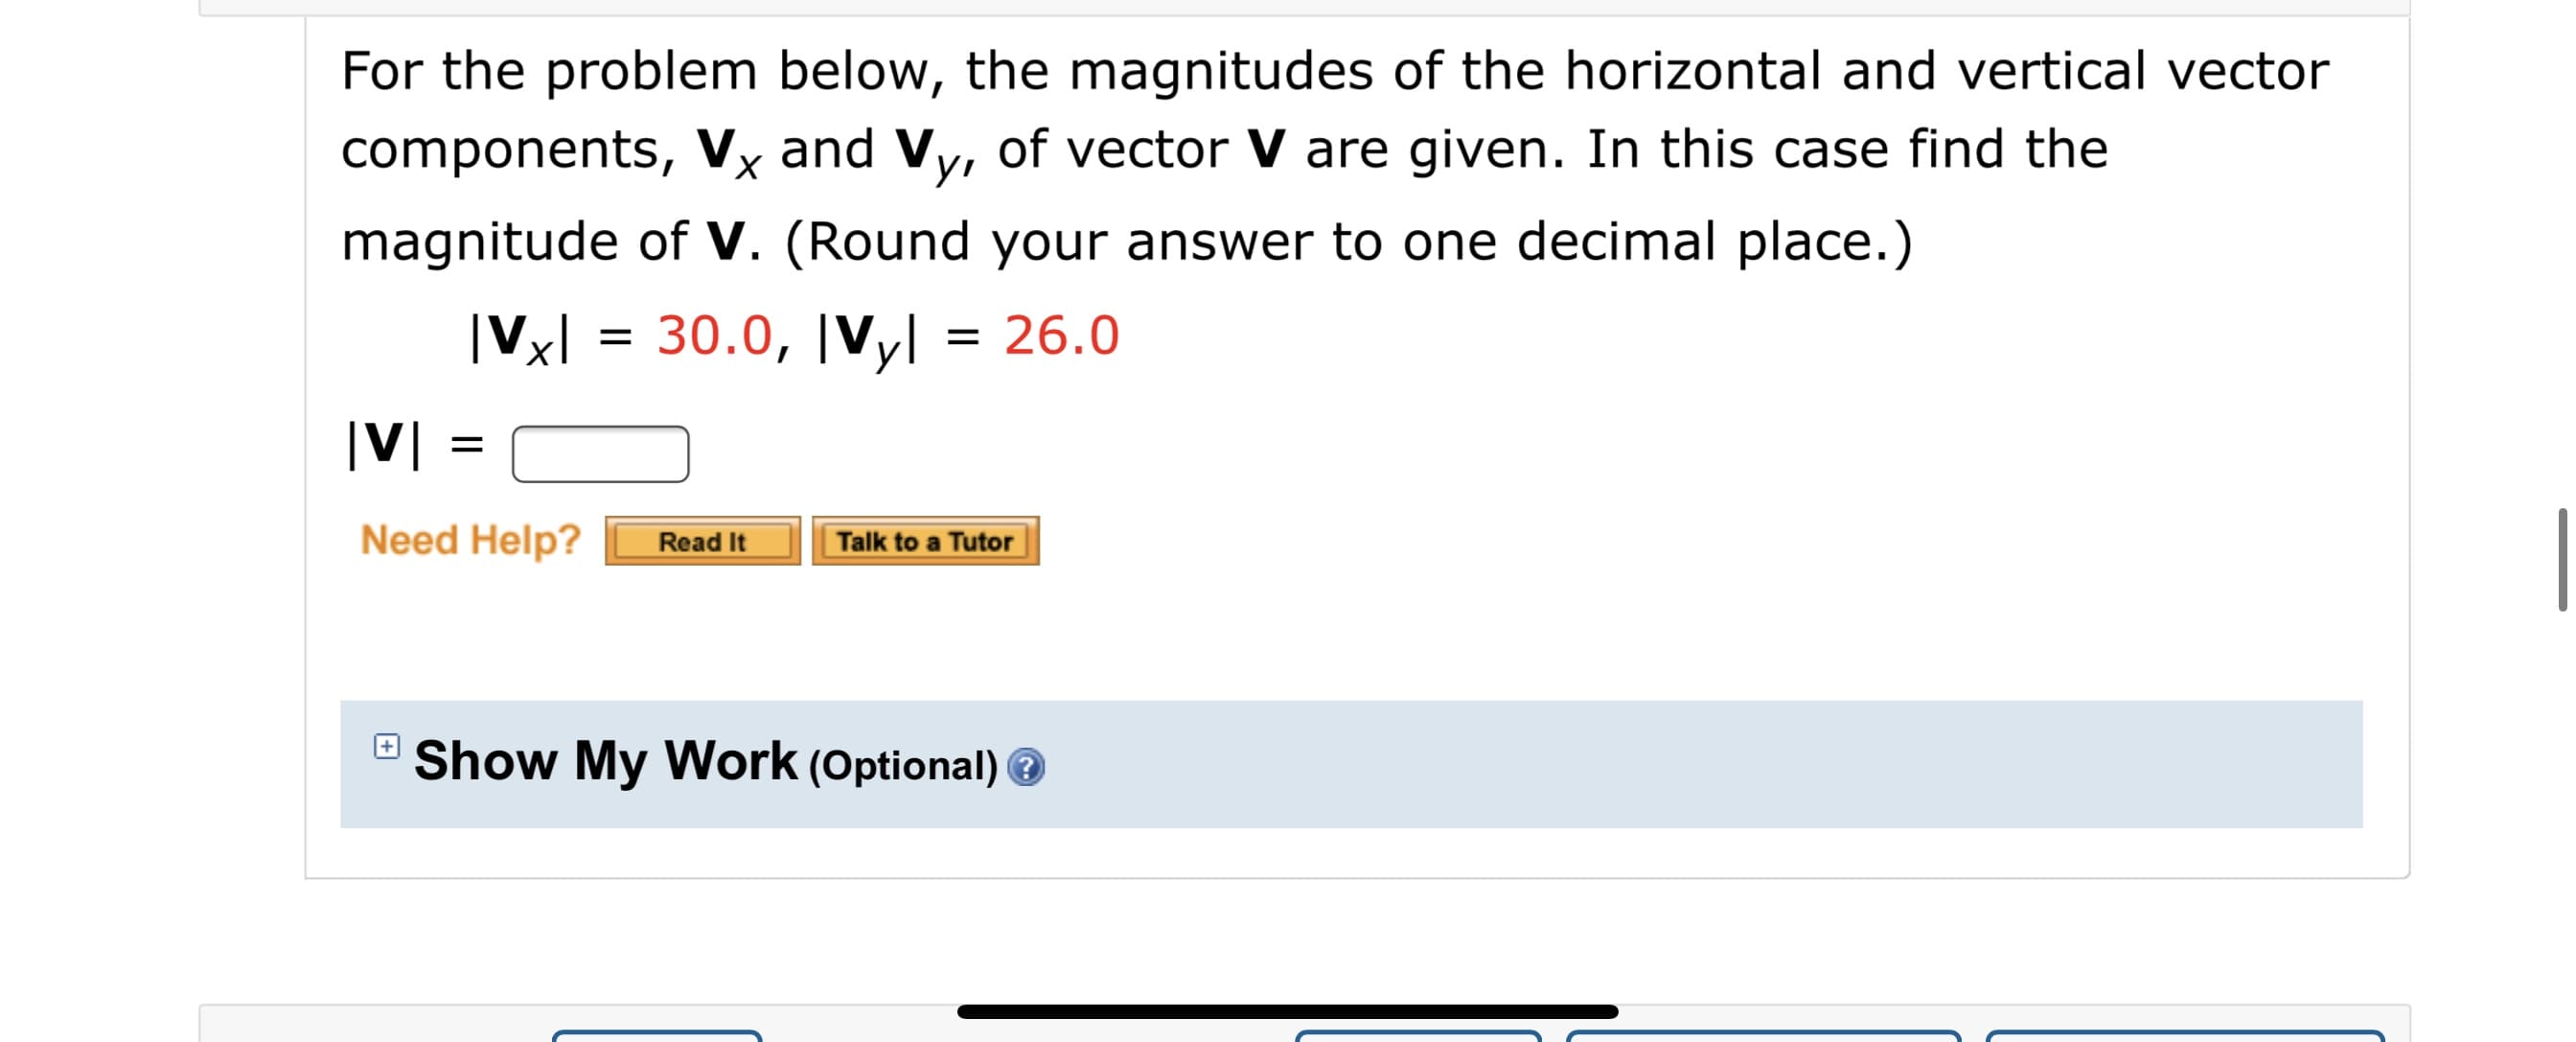 For the problem below, the magnitudes of the horizontal and vertical vector
components, Vx and Vy, of vector V are given. In this case find the
magnitude of V. (Round your answer to one decimal place.)
|Vx| =
30.0, |Vyl = 26.0
